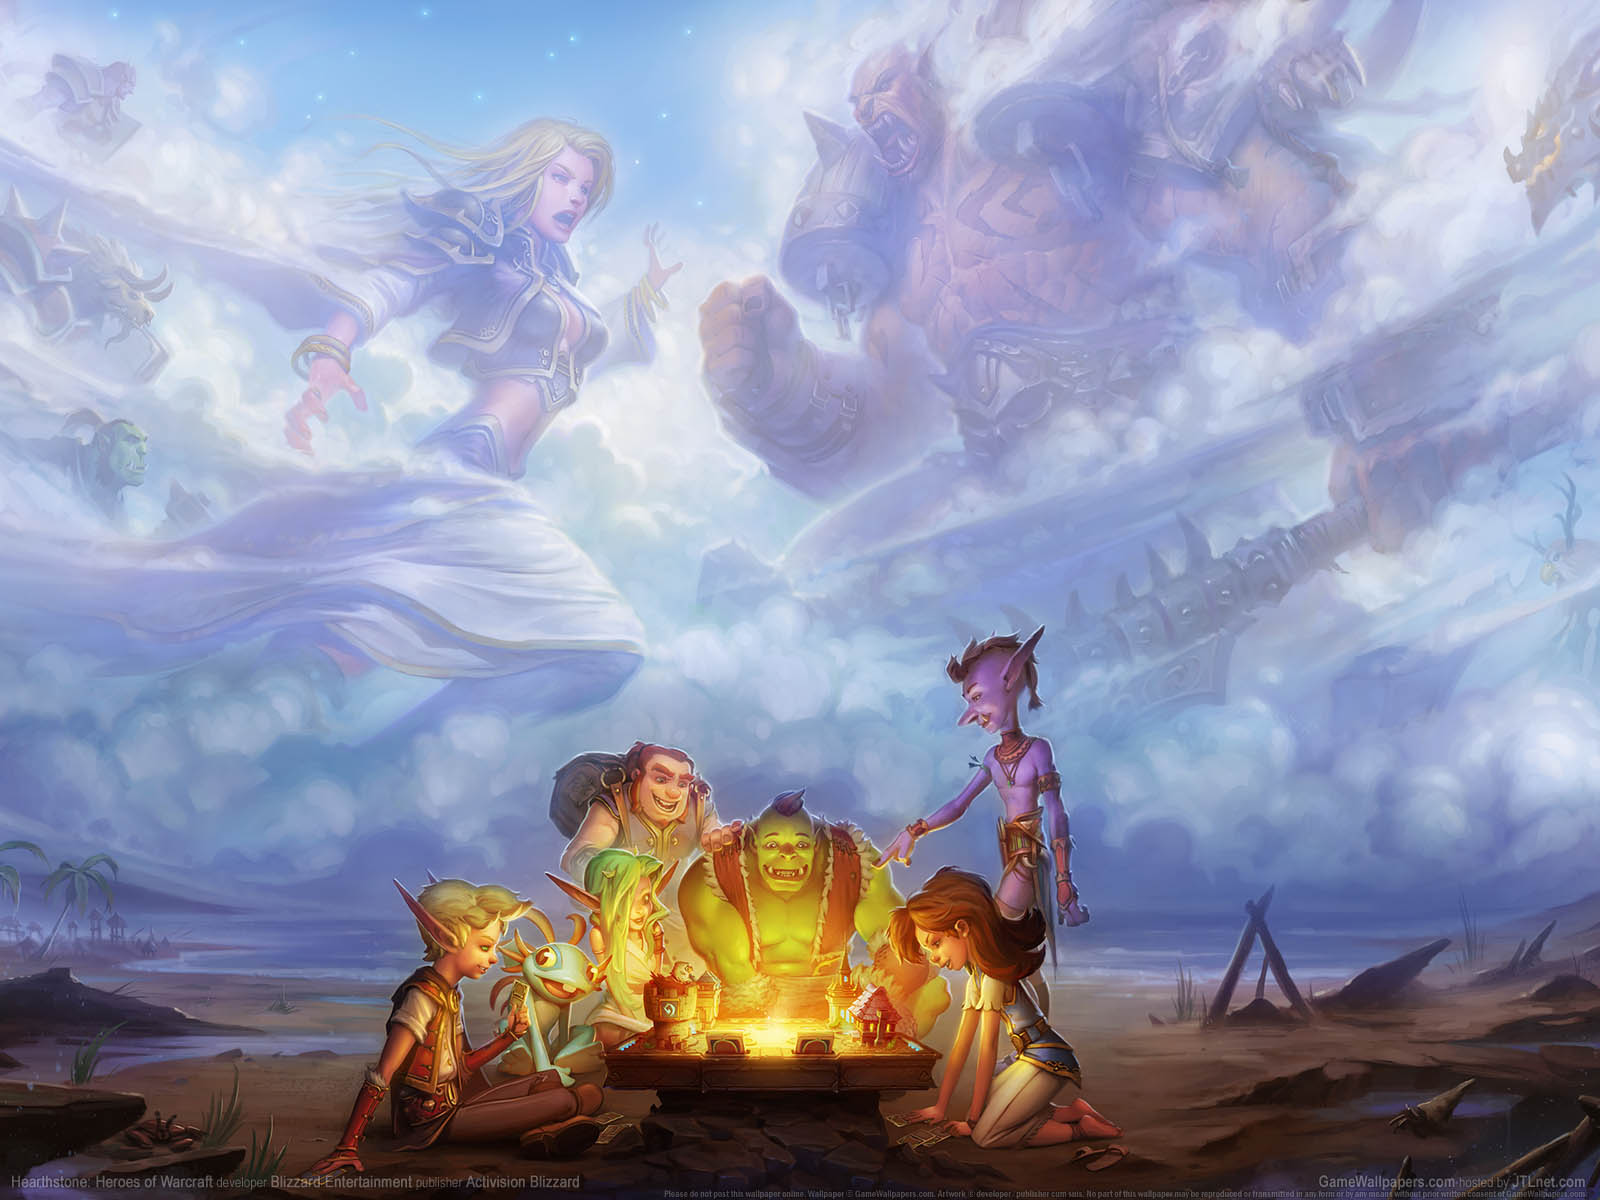 Hearthstone%3A Heroes of Warcraft wallpaper 09 1600x1200